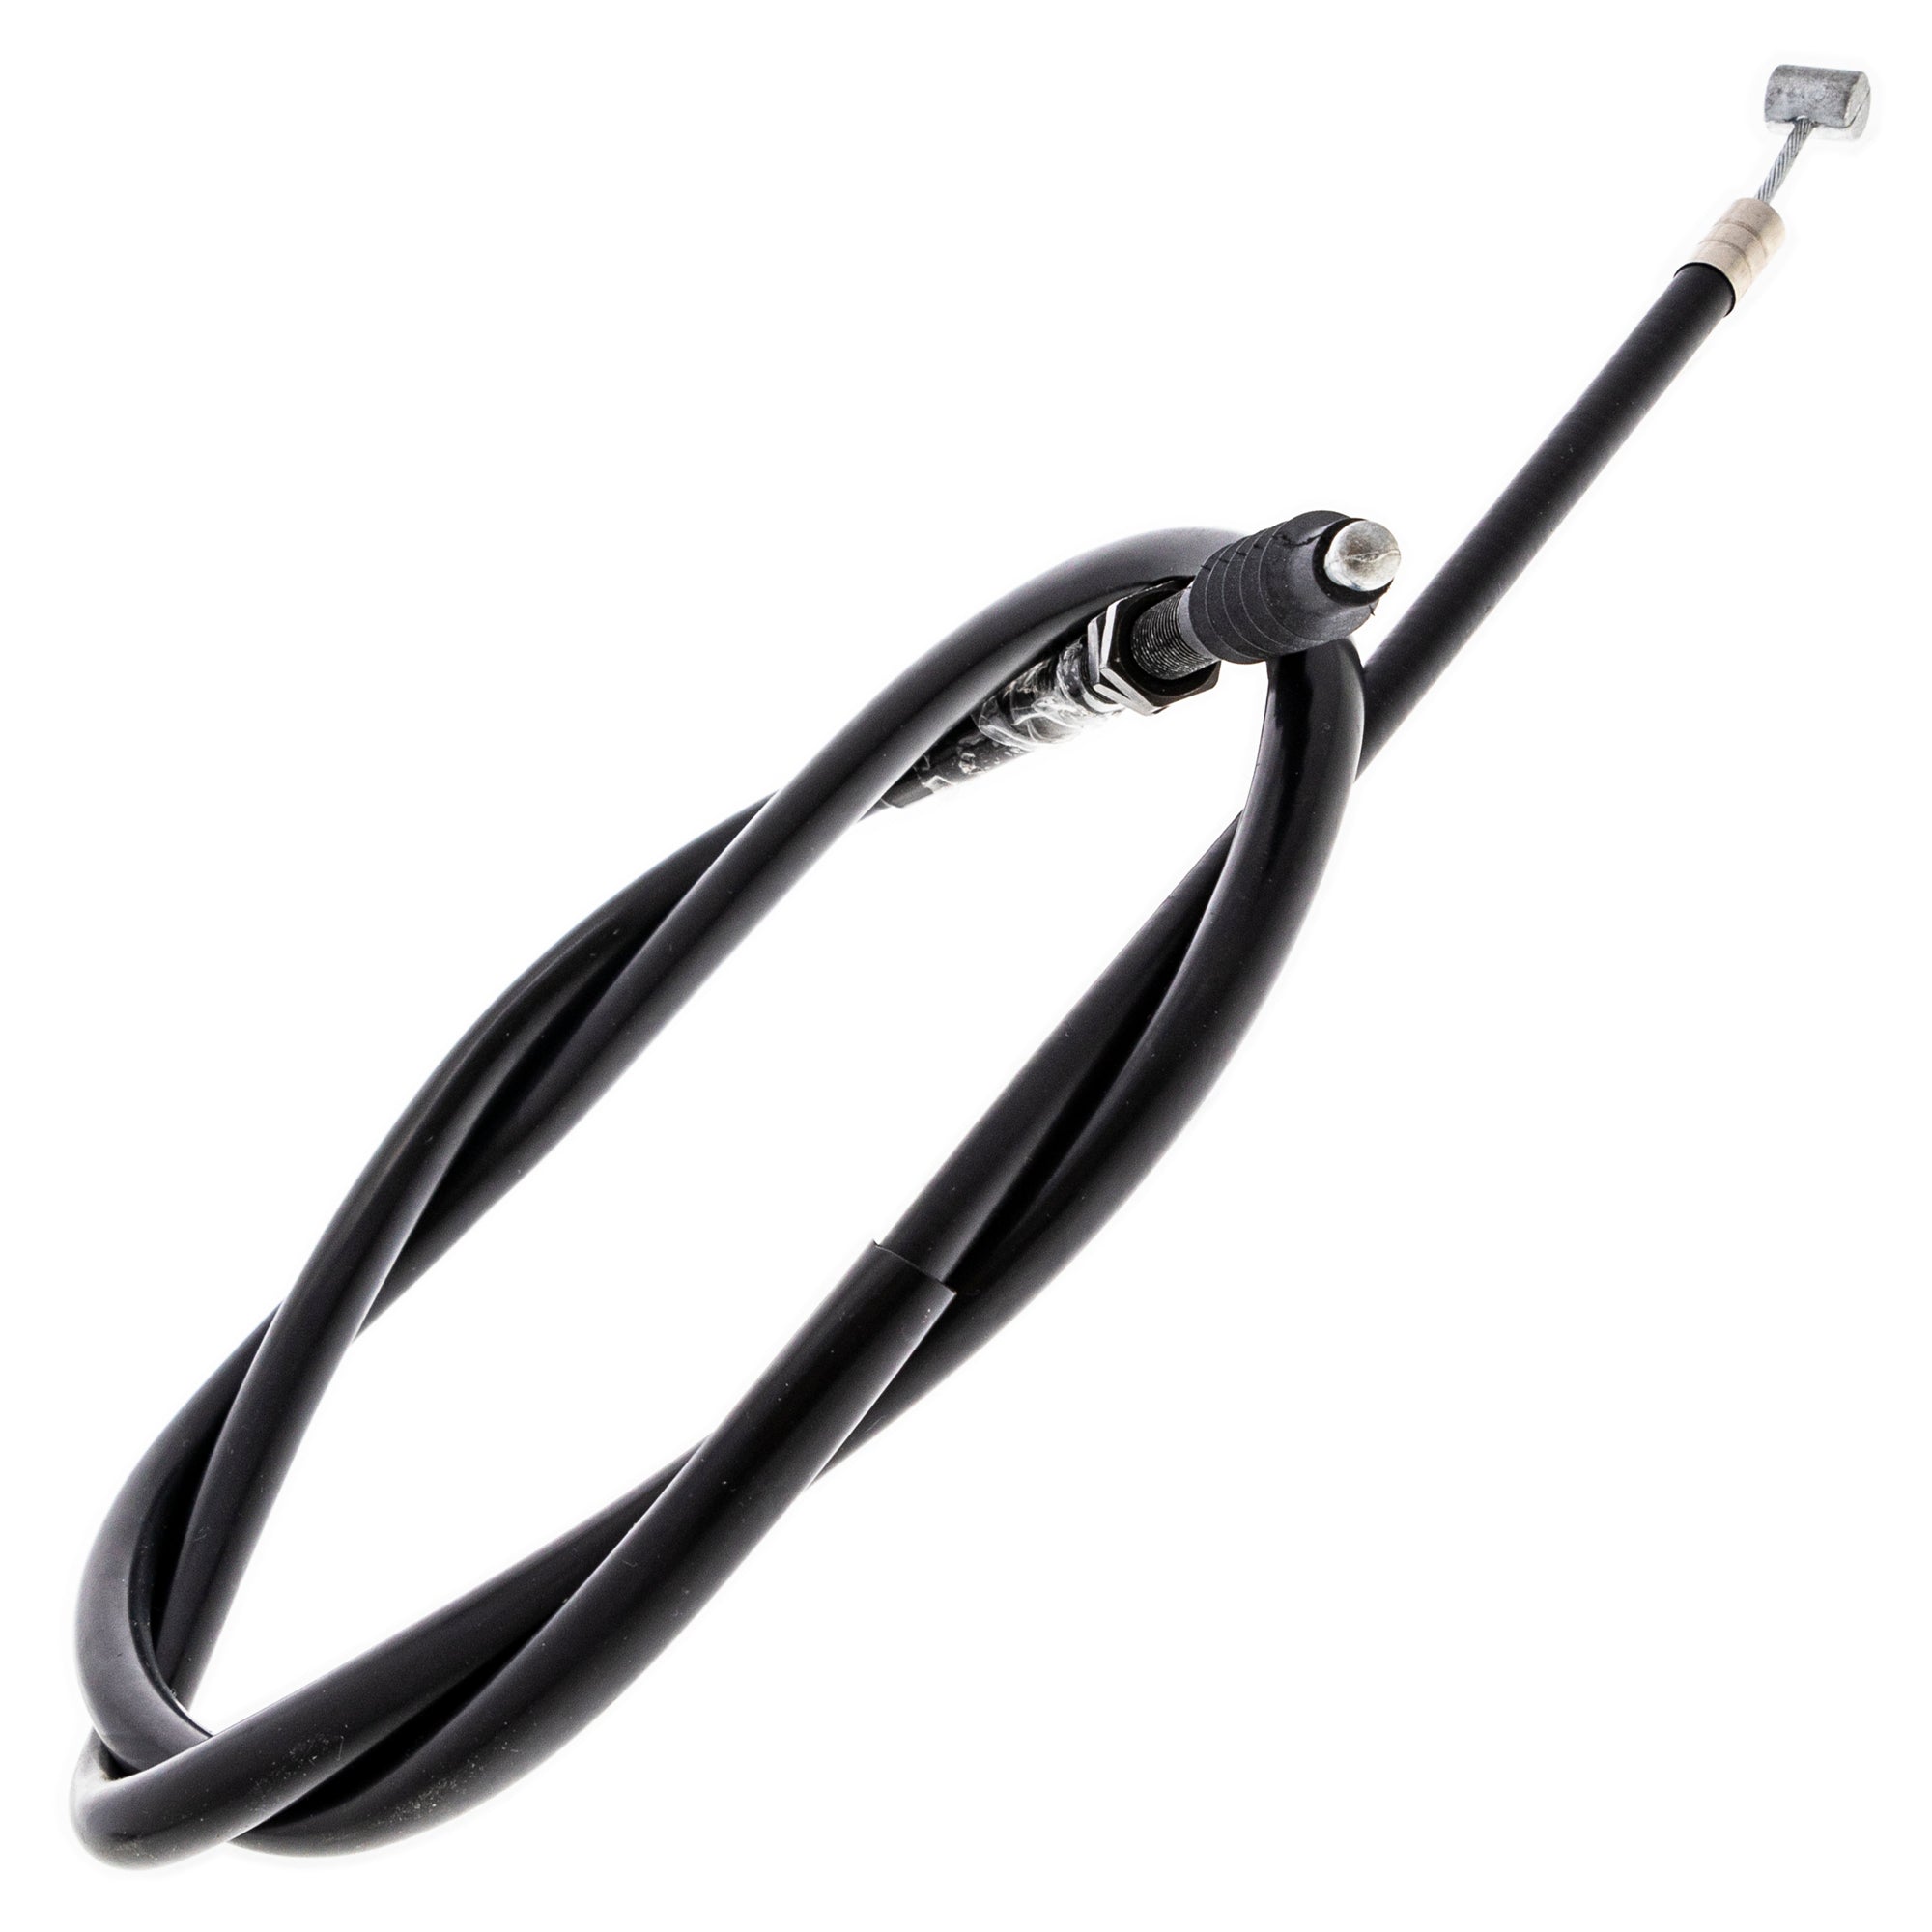 Clutch Cable for Honda XR250L XR250R 22870-KZ1-600 Motorcycle